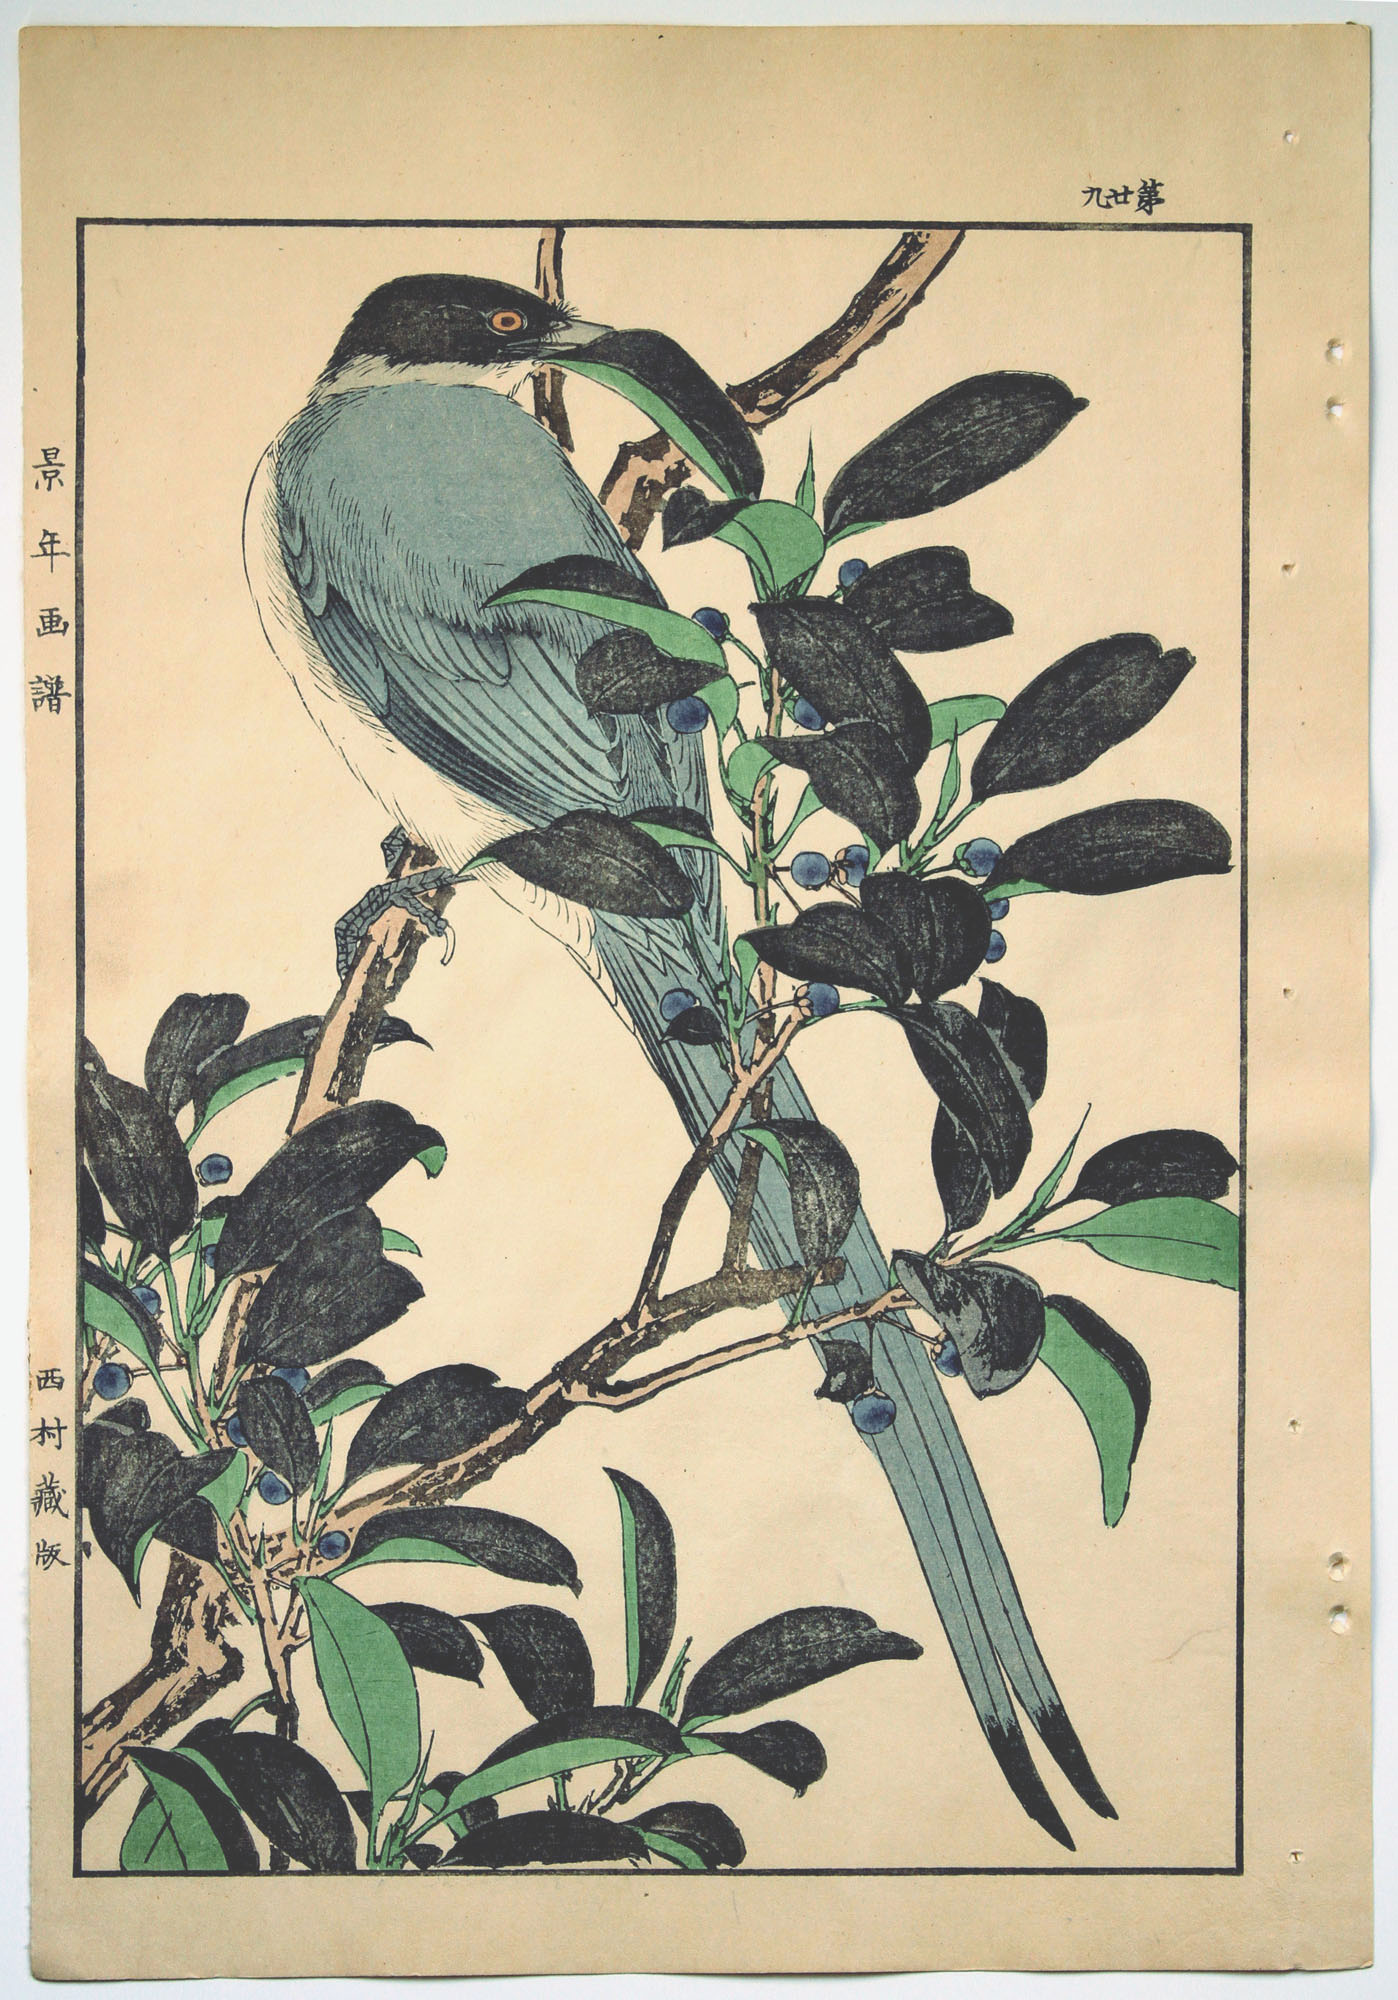 Imao KEINEN (1845-1924) Blue Magpie on a branch of Eurya Japonica